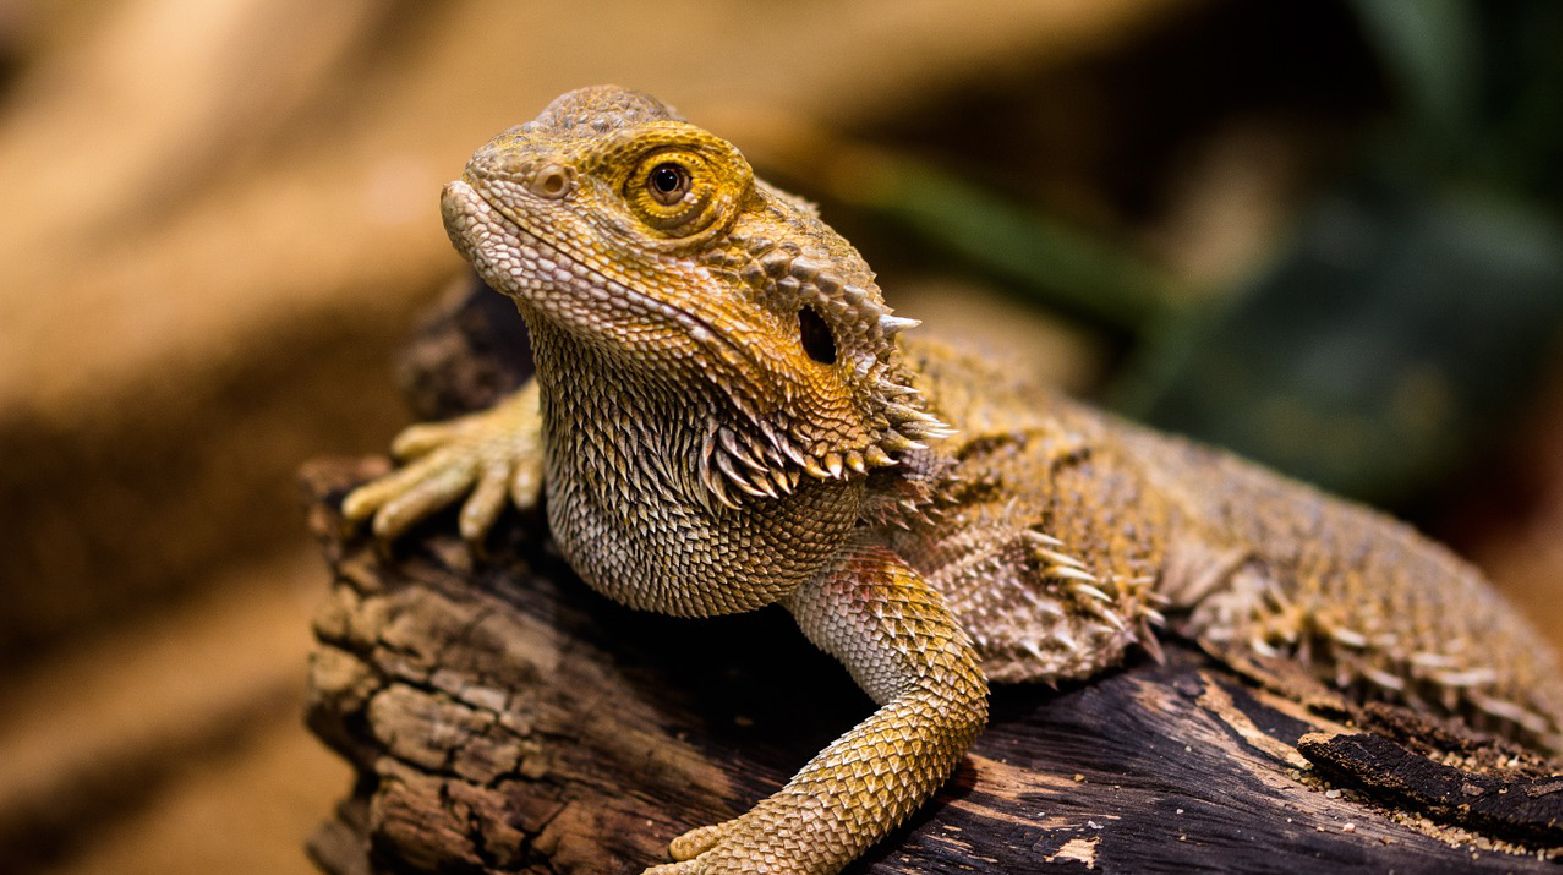 can bearded dragons see red light